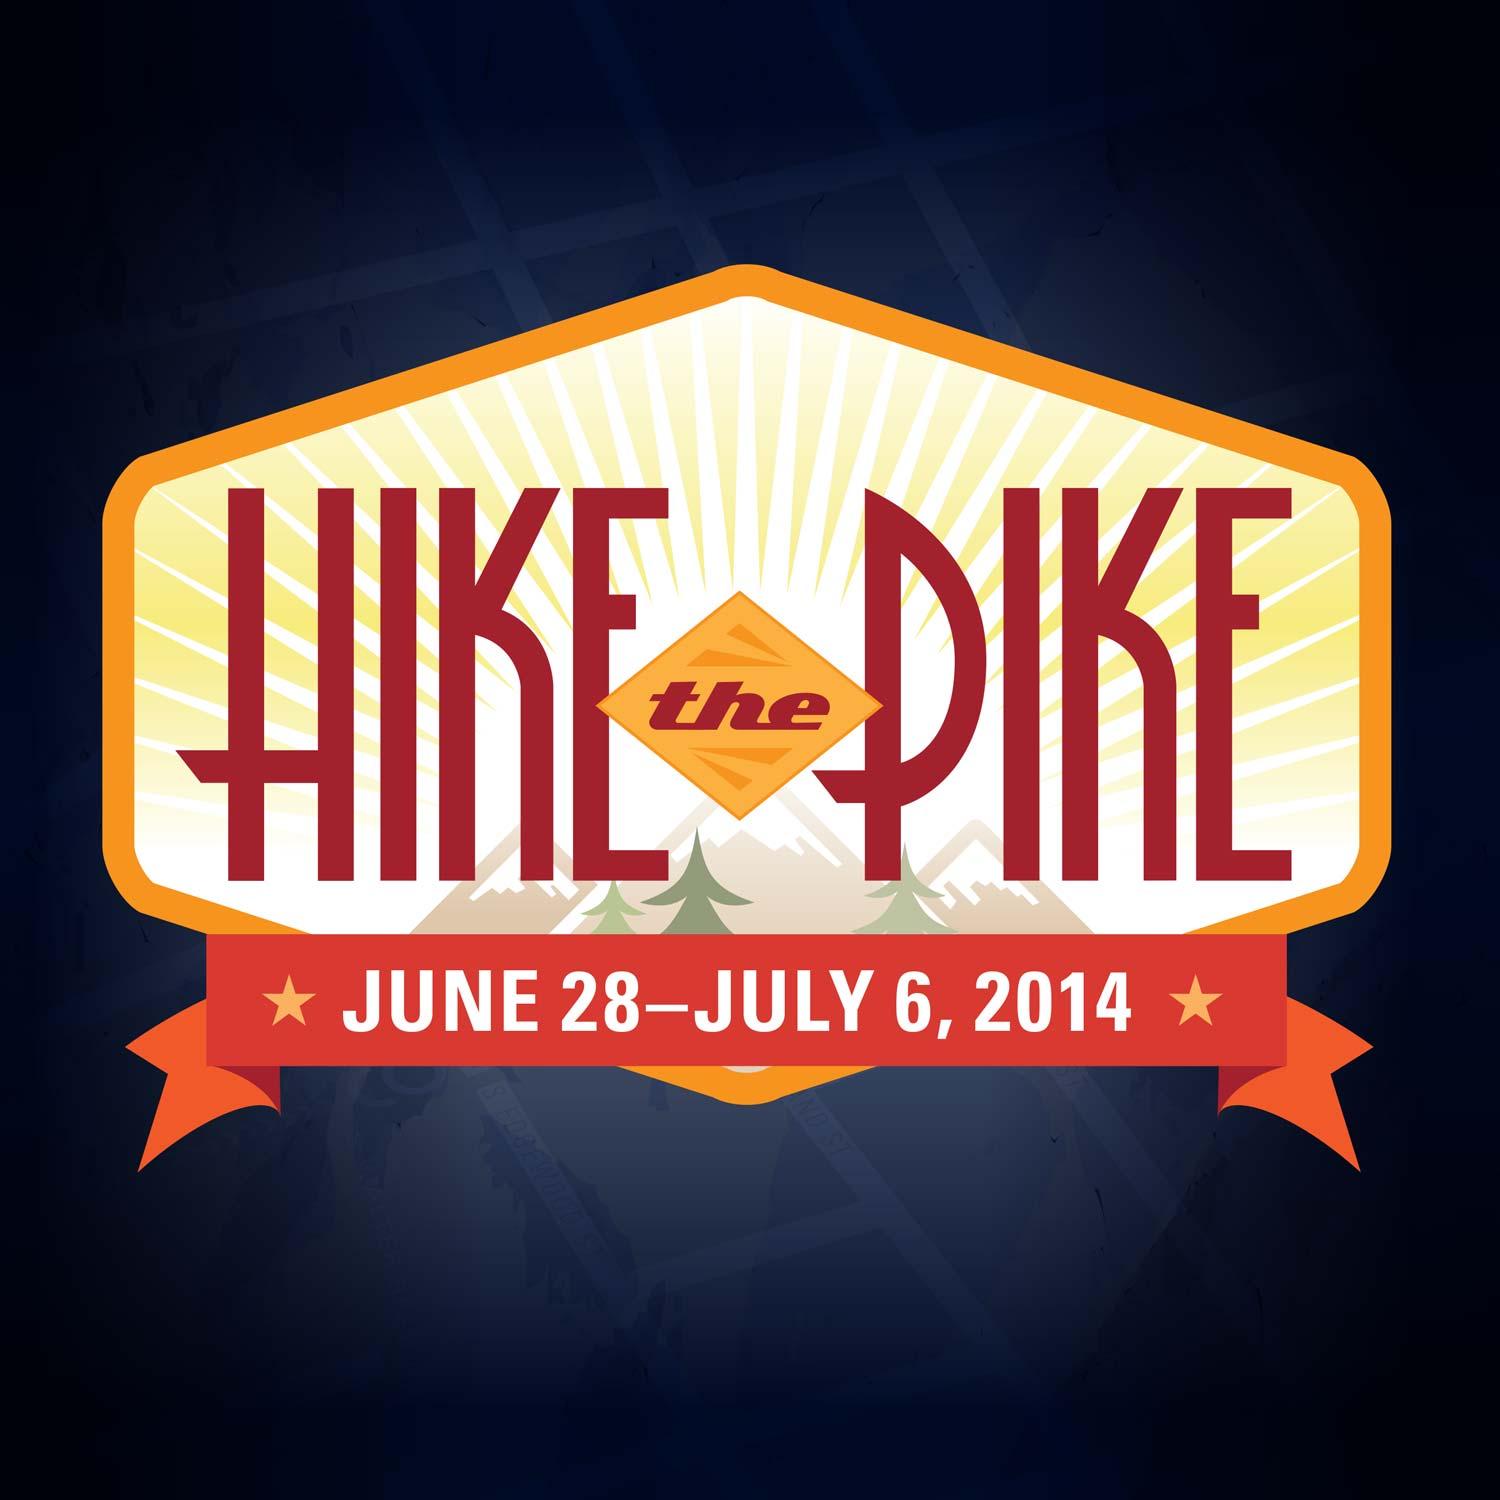 Pike Square Logo - Logo, CPRO's Hike the Pike Campaign